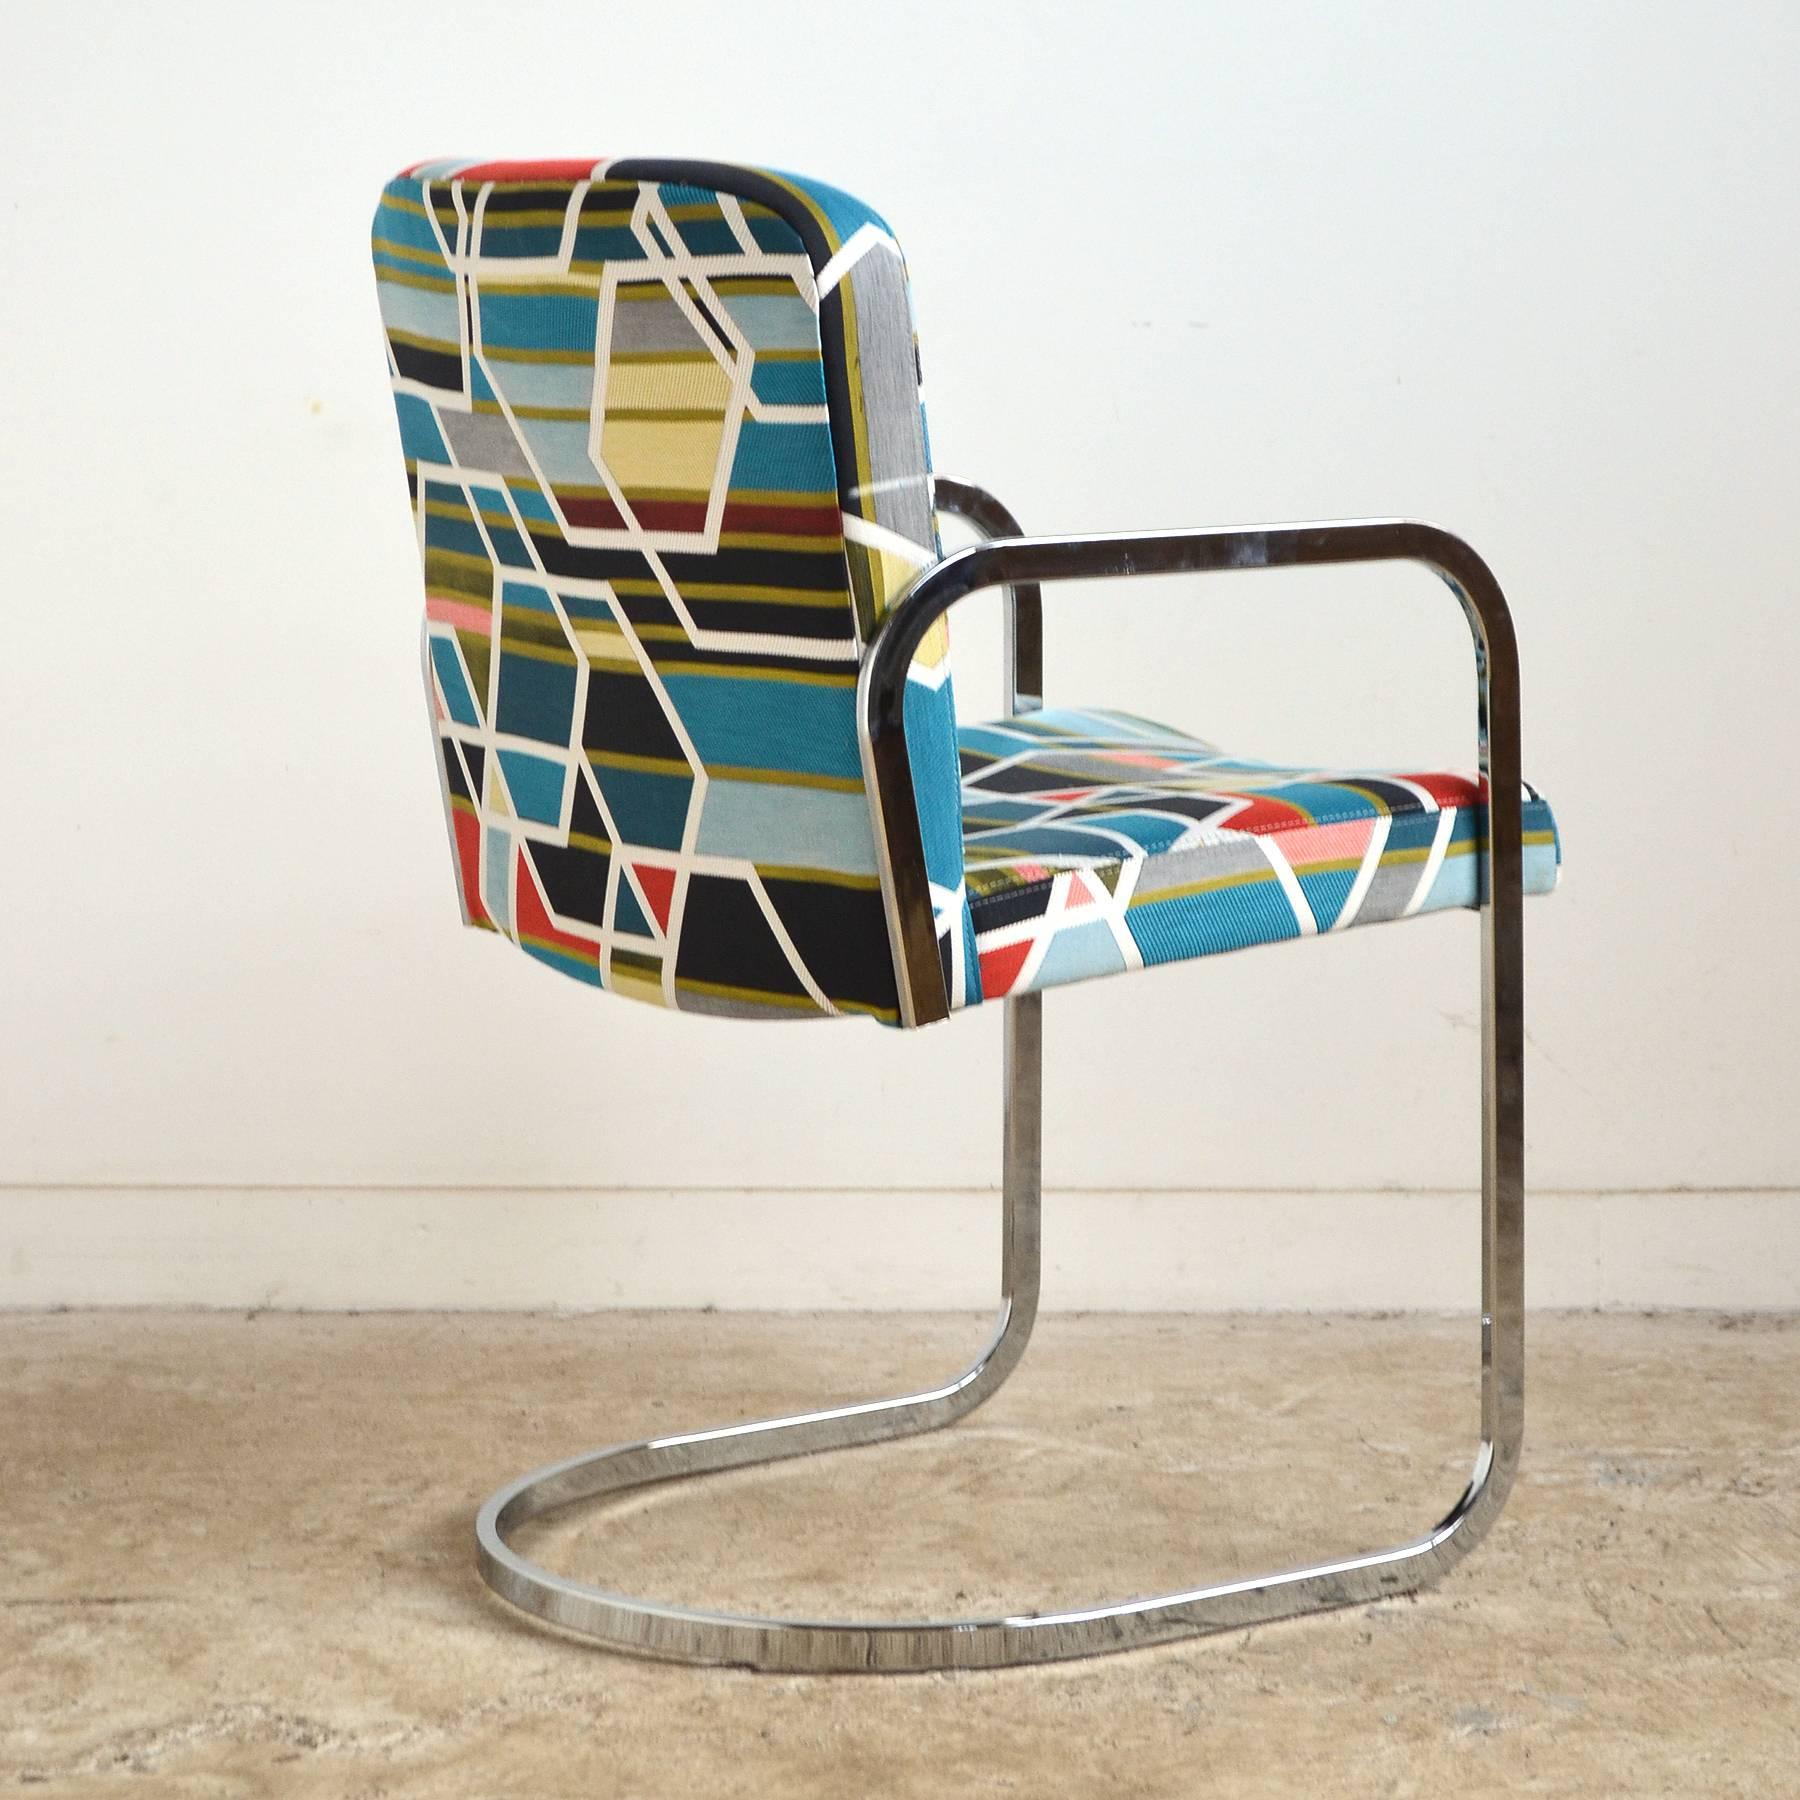 American Design Institute America Set of Four Chairs with Maharam Fabric